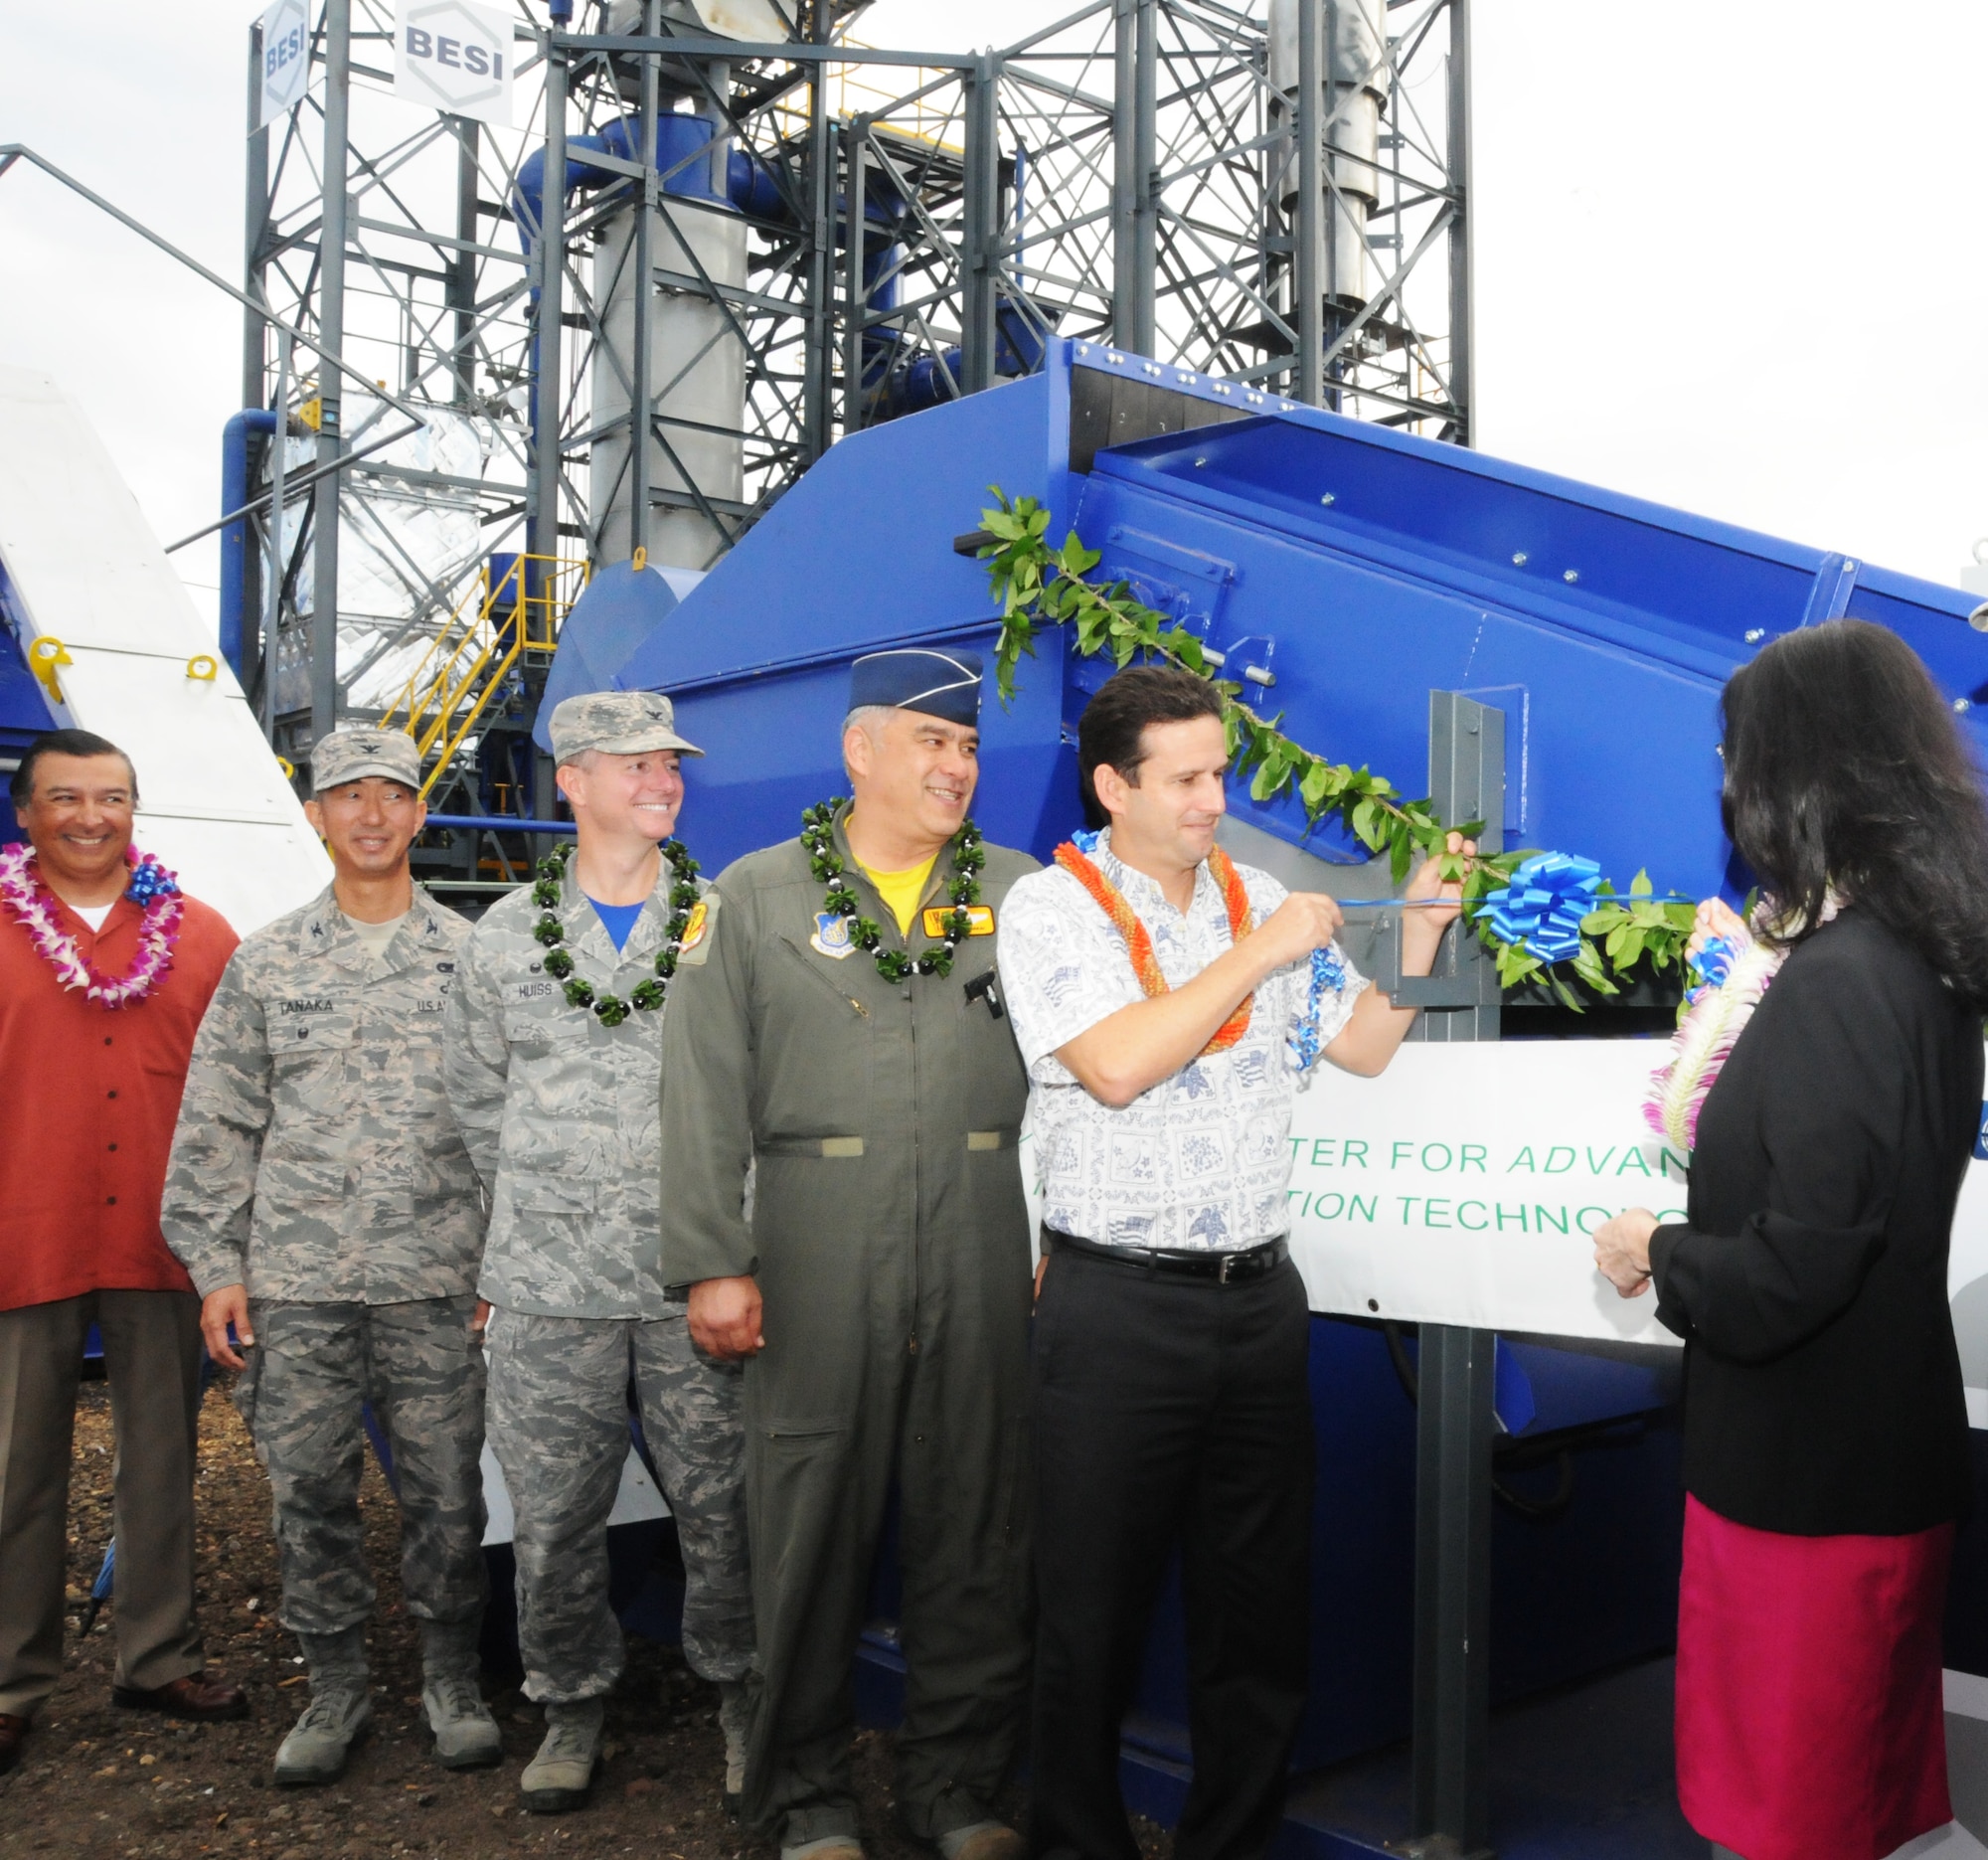 U.S. Senator Brian Schatz pulls the ribbon at the unveiling ceremony of a new $6.8 million waste to energy system at Joint Base Pearl Harbor-Hickam, Hawaii, Feb. 19, 2016.  The new system is one part of the Hawaii Air National Guard's renewable energy strategy. The Air Force Research Labs selected the Hawaii Air National Guard’s 154th Wing to demonstrate an integrated microgrid concept that tests the viability of using renewable energy and microgrids to assure that the Air Force can continue mission critical operations regardless of the state of the public utility grid or cyber-attack. (U.S. Air National Guard photo by Senior Airman Orlando Corpuz/released)